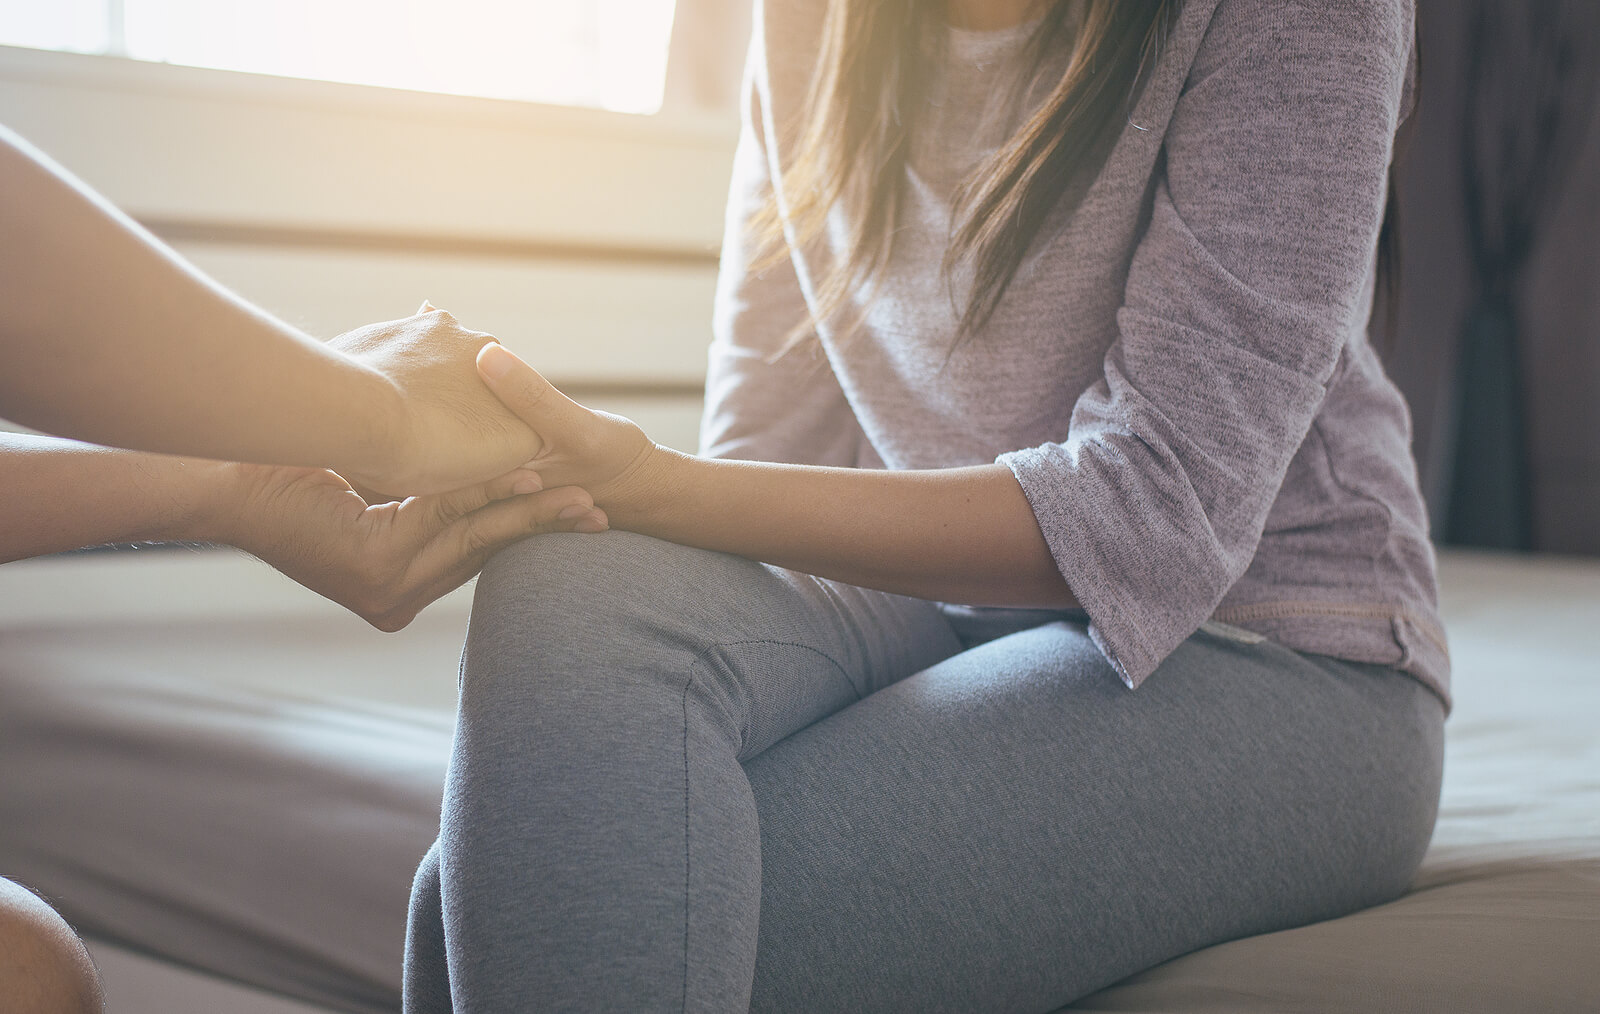 Photo of a woman holding someone's hand. Looking to recover from your anorexia? Learn how anorexia nervosa treatment in Georgia can help you on your journey to recovery.